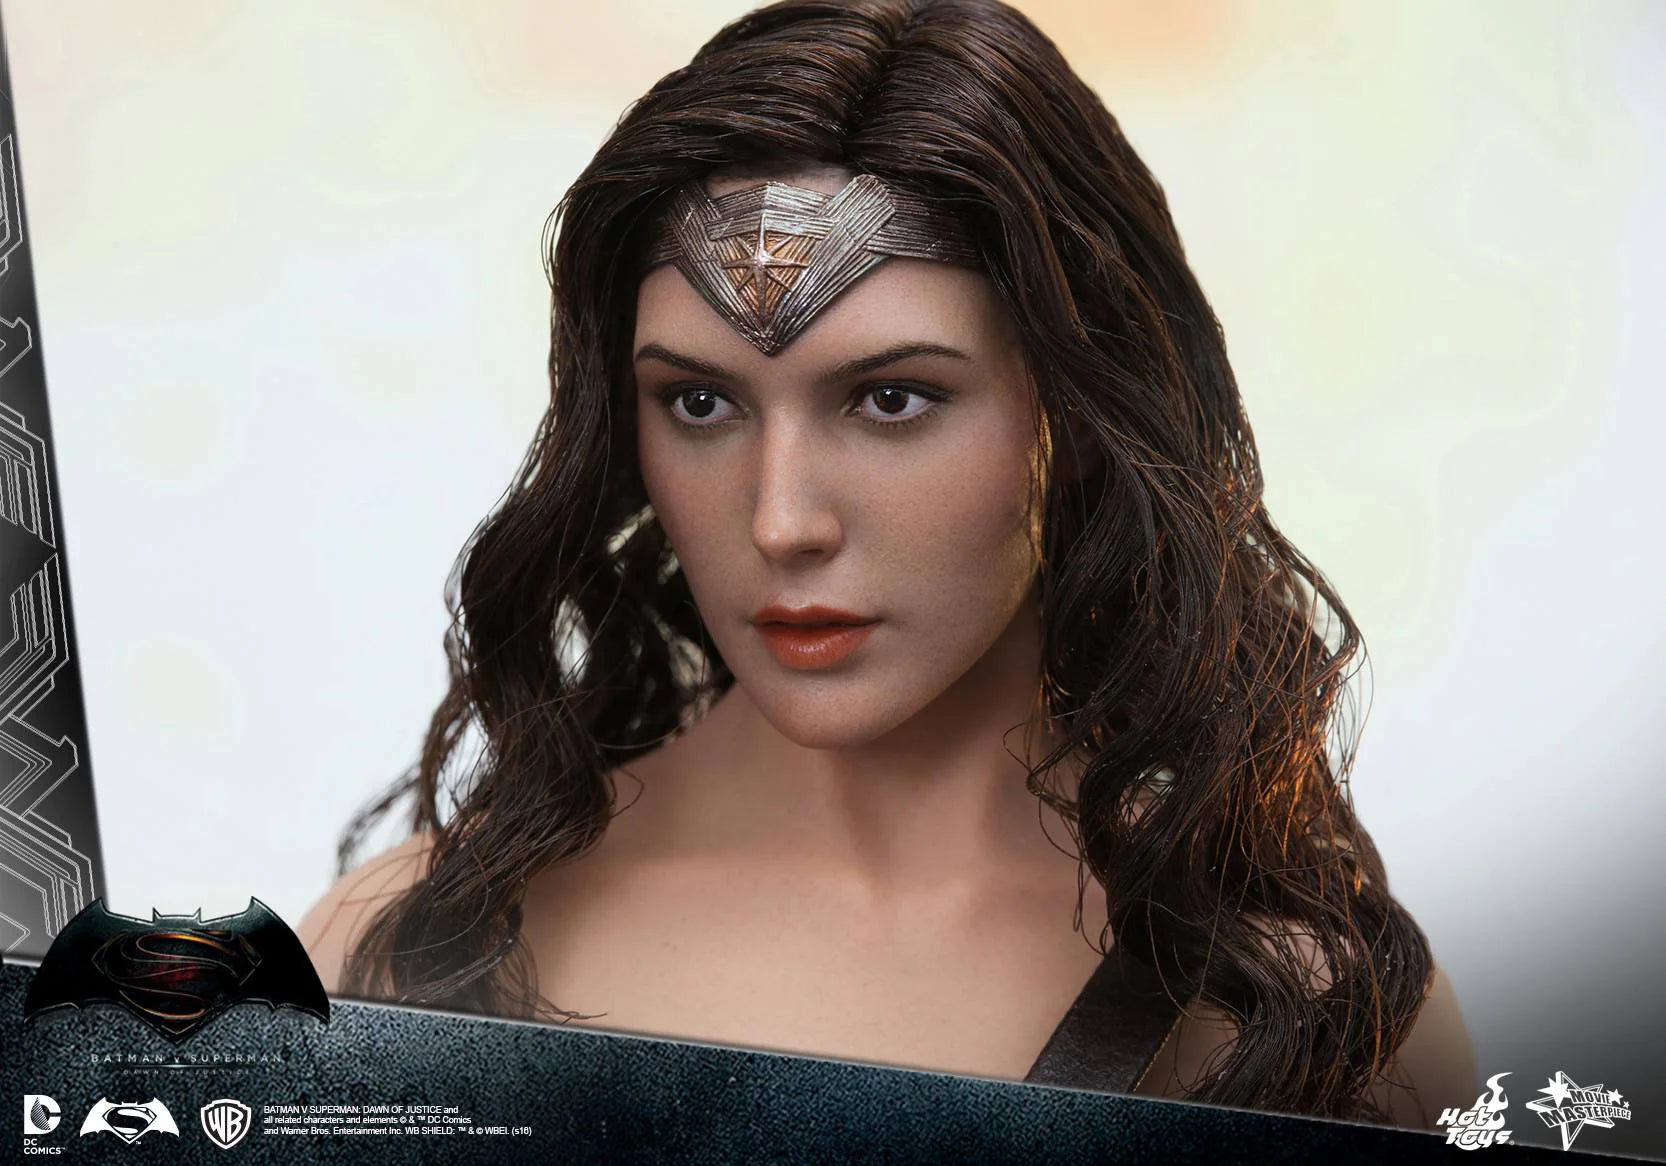 HOT TOYS DC BATMAN VS SUPERMAN DAWN OF JUSTICE WONDER WOMAN 1/6 SCALE MMS359 - Anotoys Collectibles